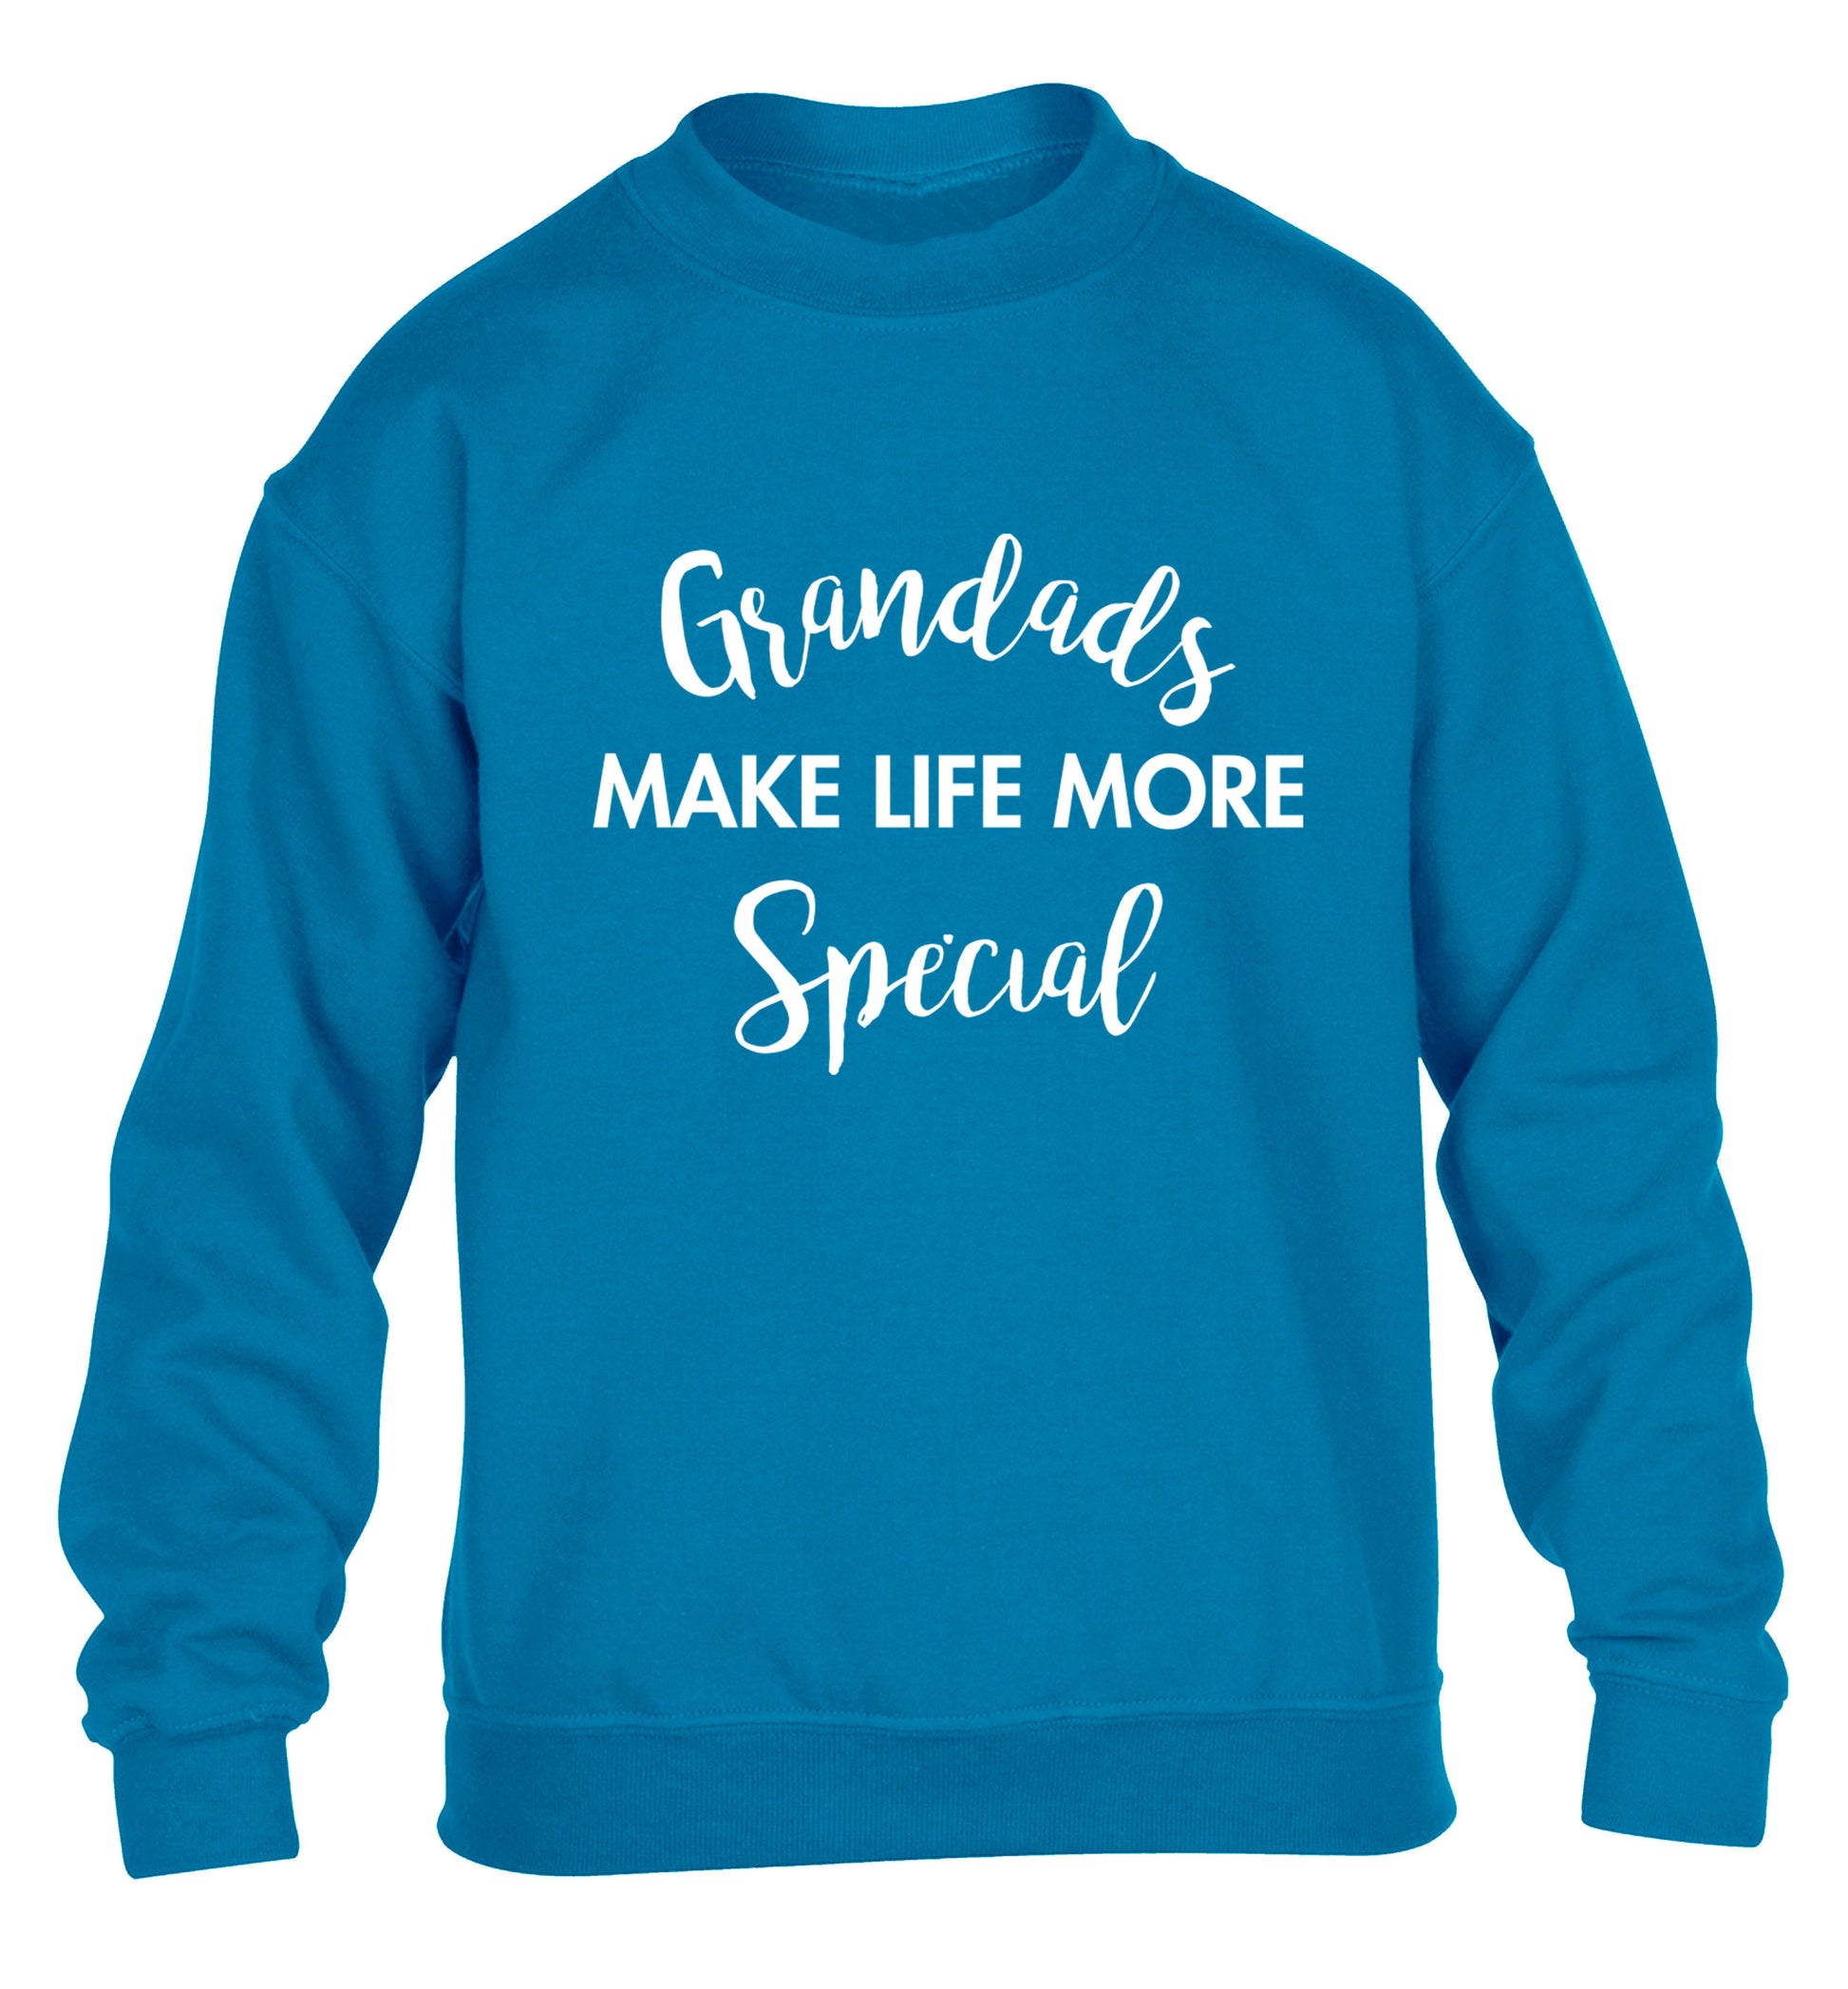 Grandads make life more special children's blue sweater 12-14 Years